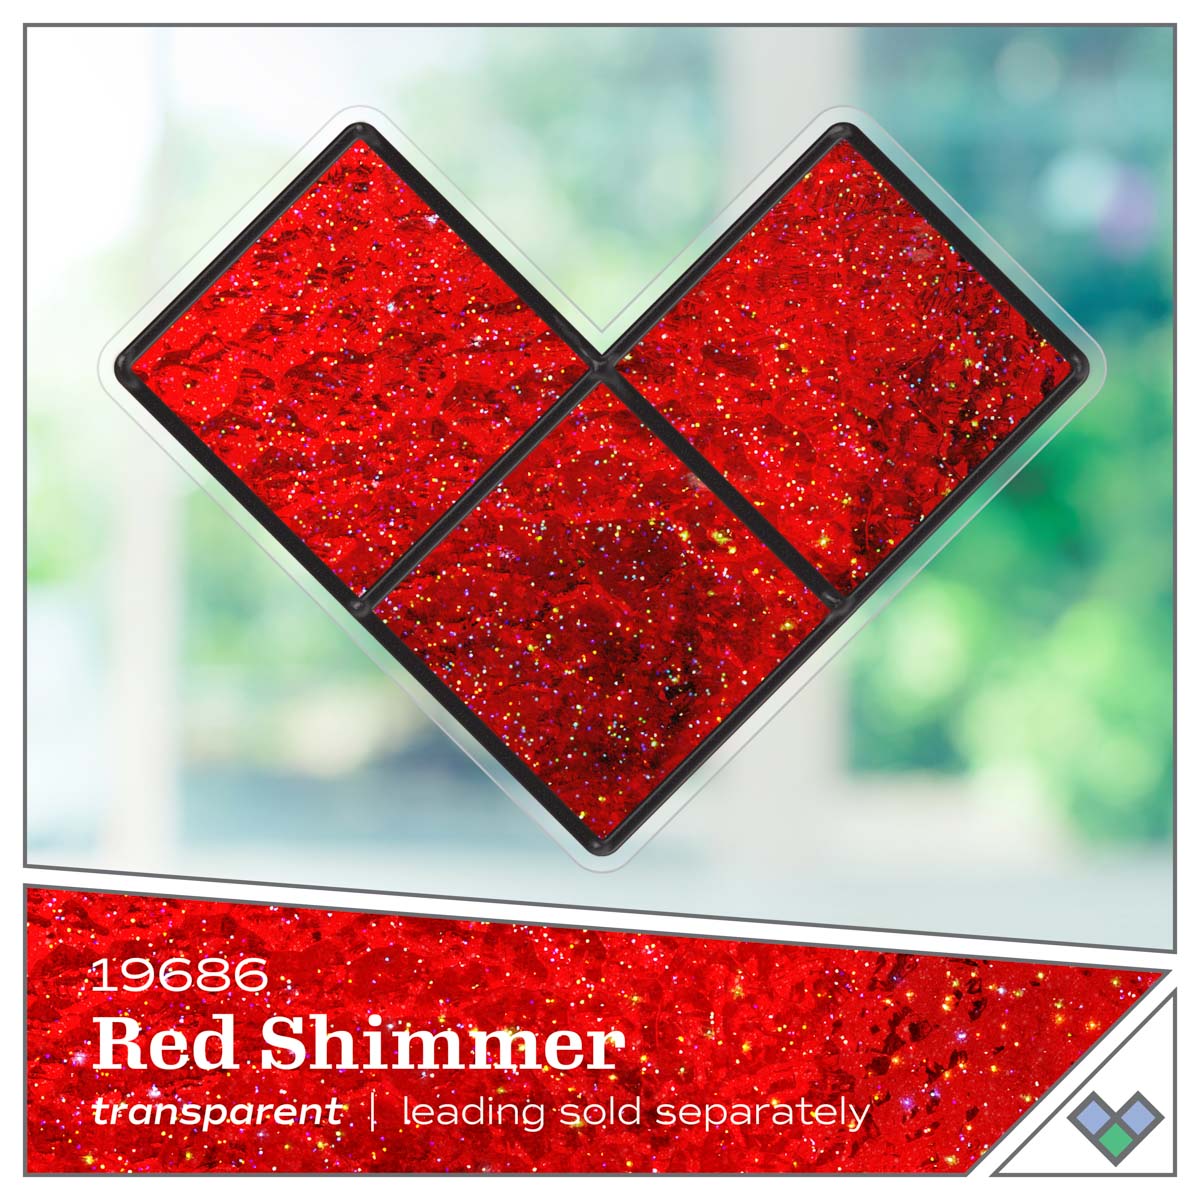 Gallery Glass ® Shimmer™ Stained Glass Effect Paint - Red, 2 oz. - 19686